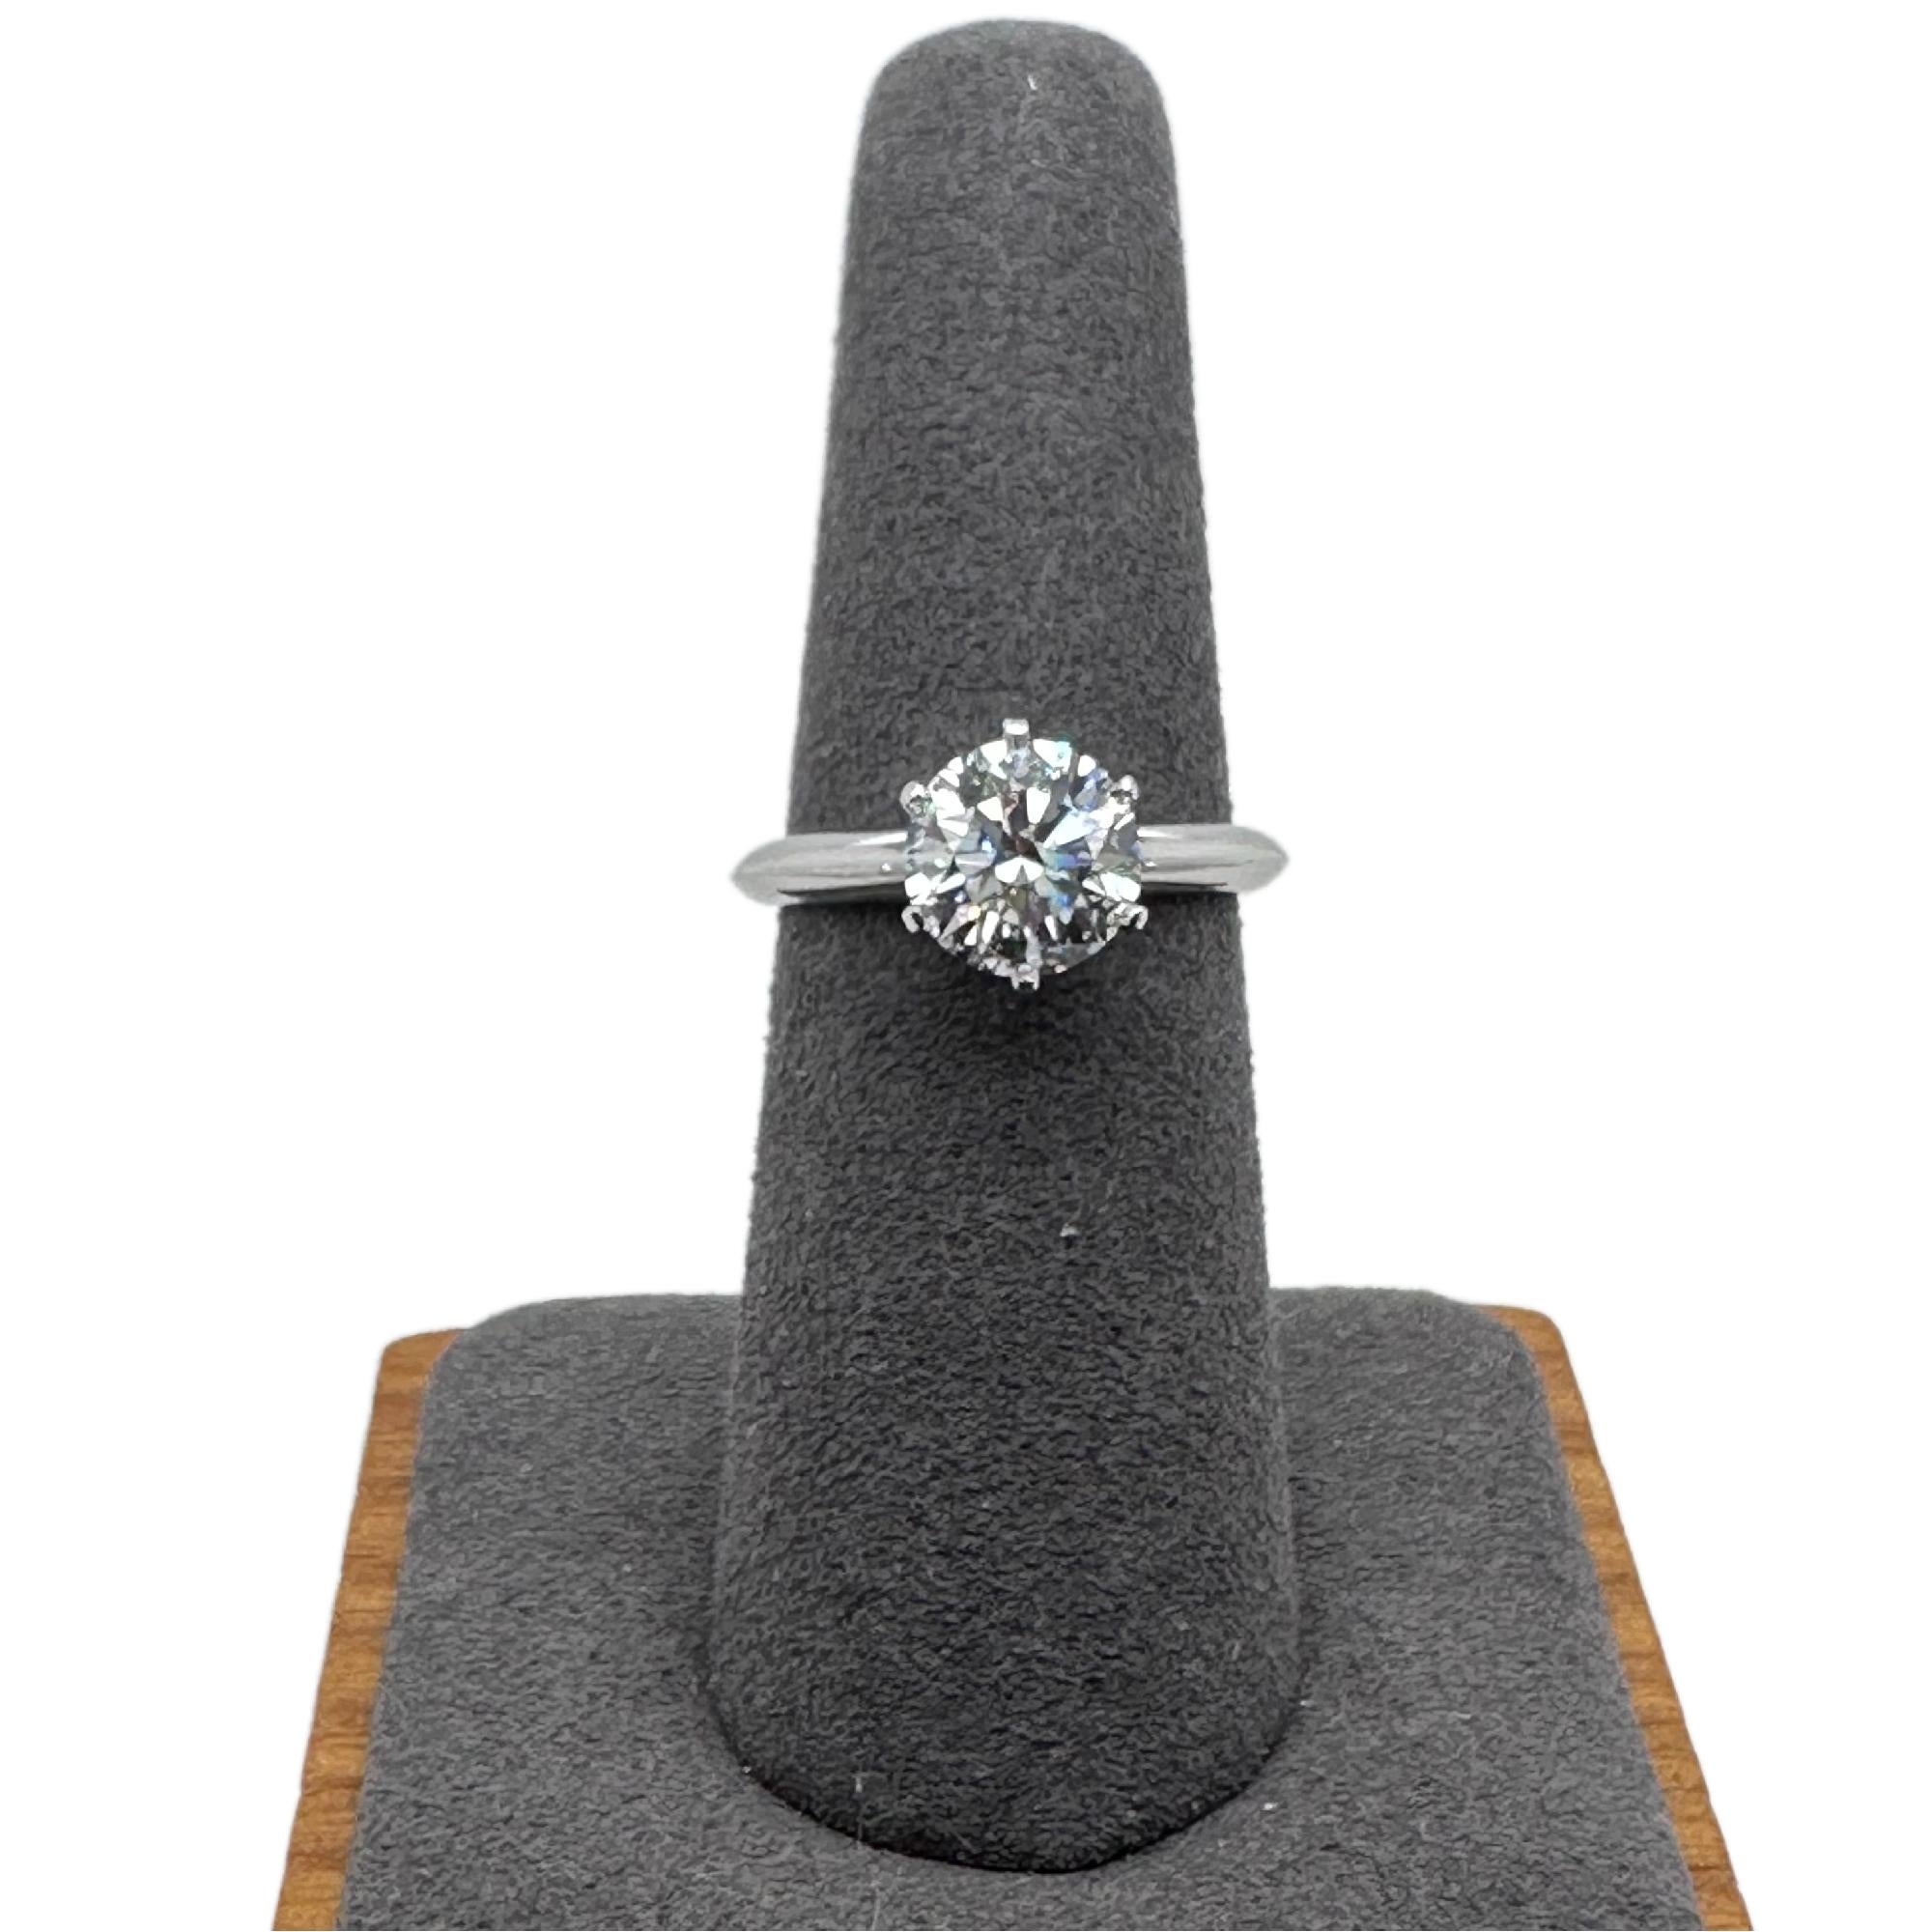 Tiffany & Co. Round Diamond 1.85cts E VS1 Solitaire Engagement Ring Platinum In Excellent Condition For Sale In San Diego, CA